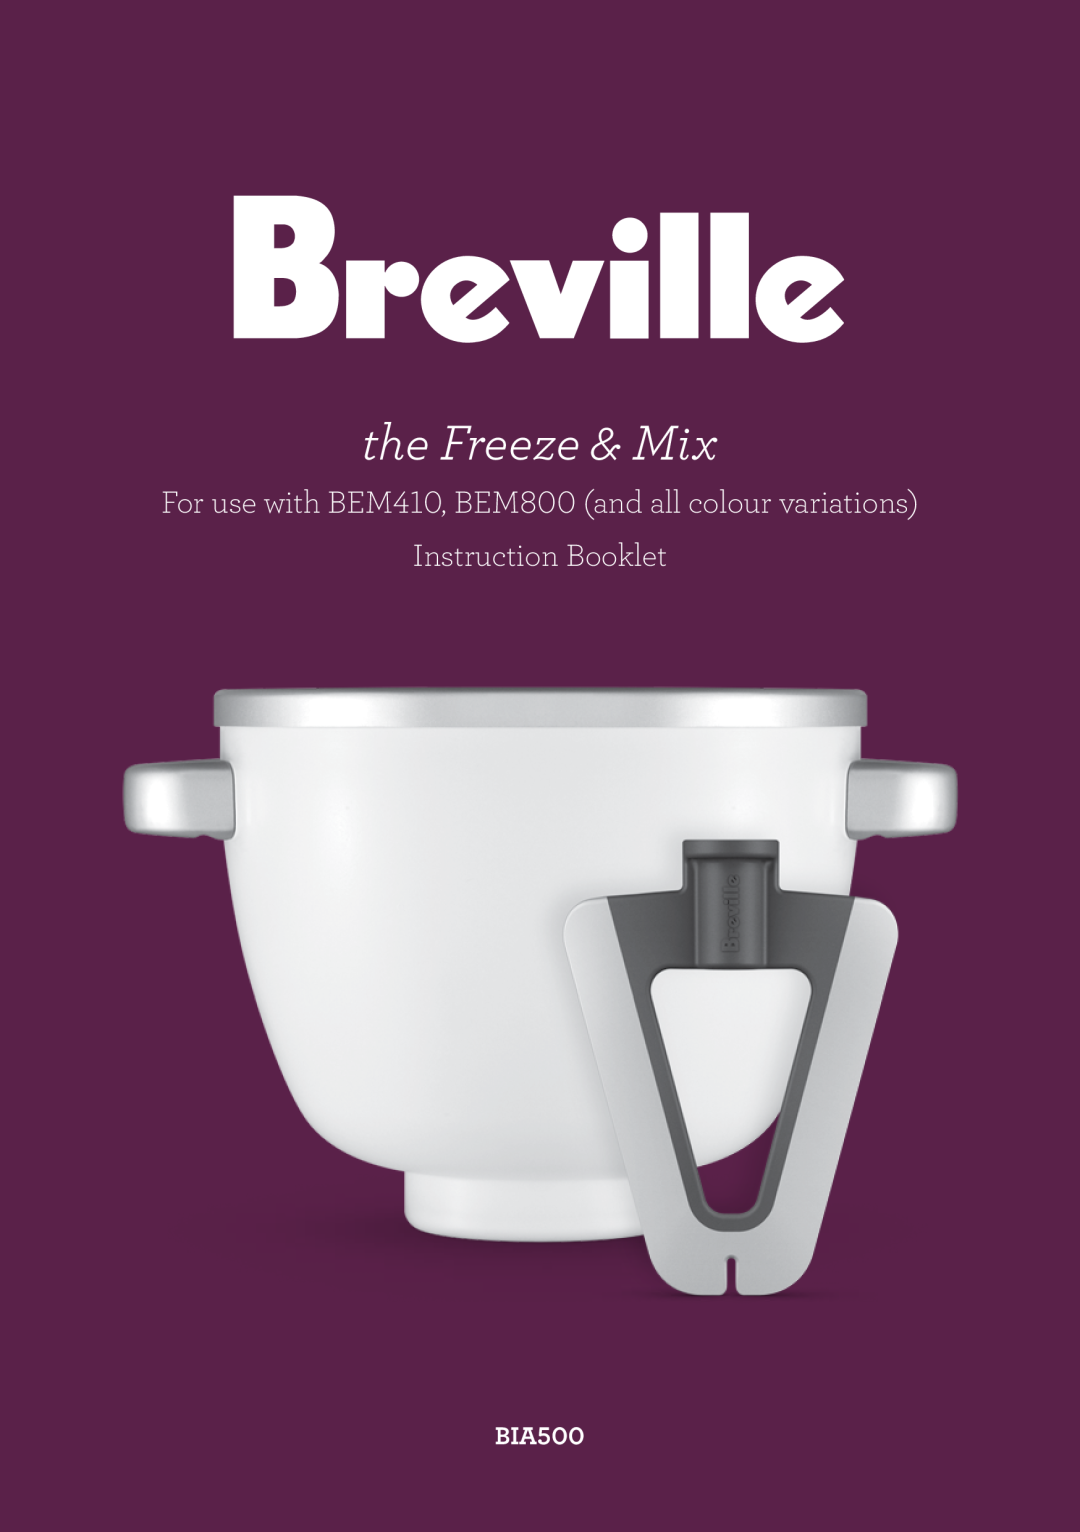 Breville BIA500 manual the Freeze & Mix, For use with BEM410, BEM800 and all colour variations, Instruction Booklet 